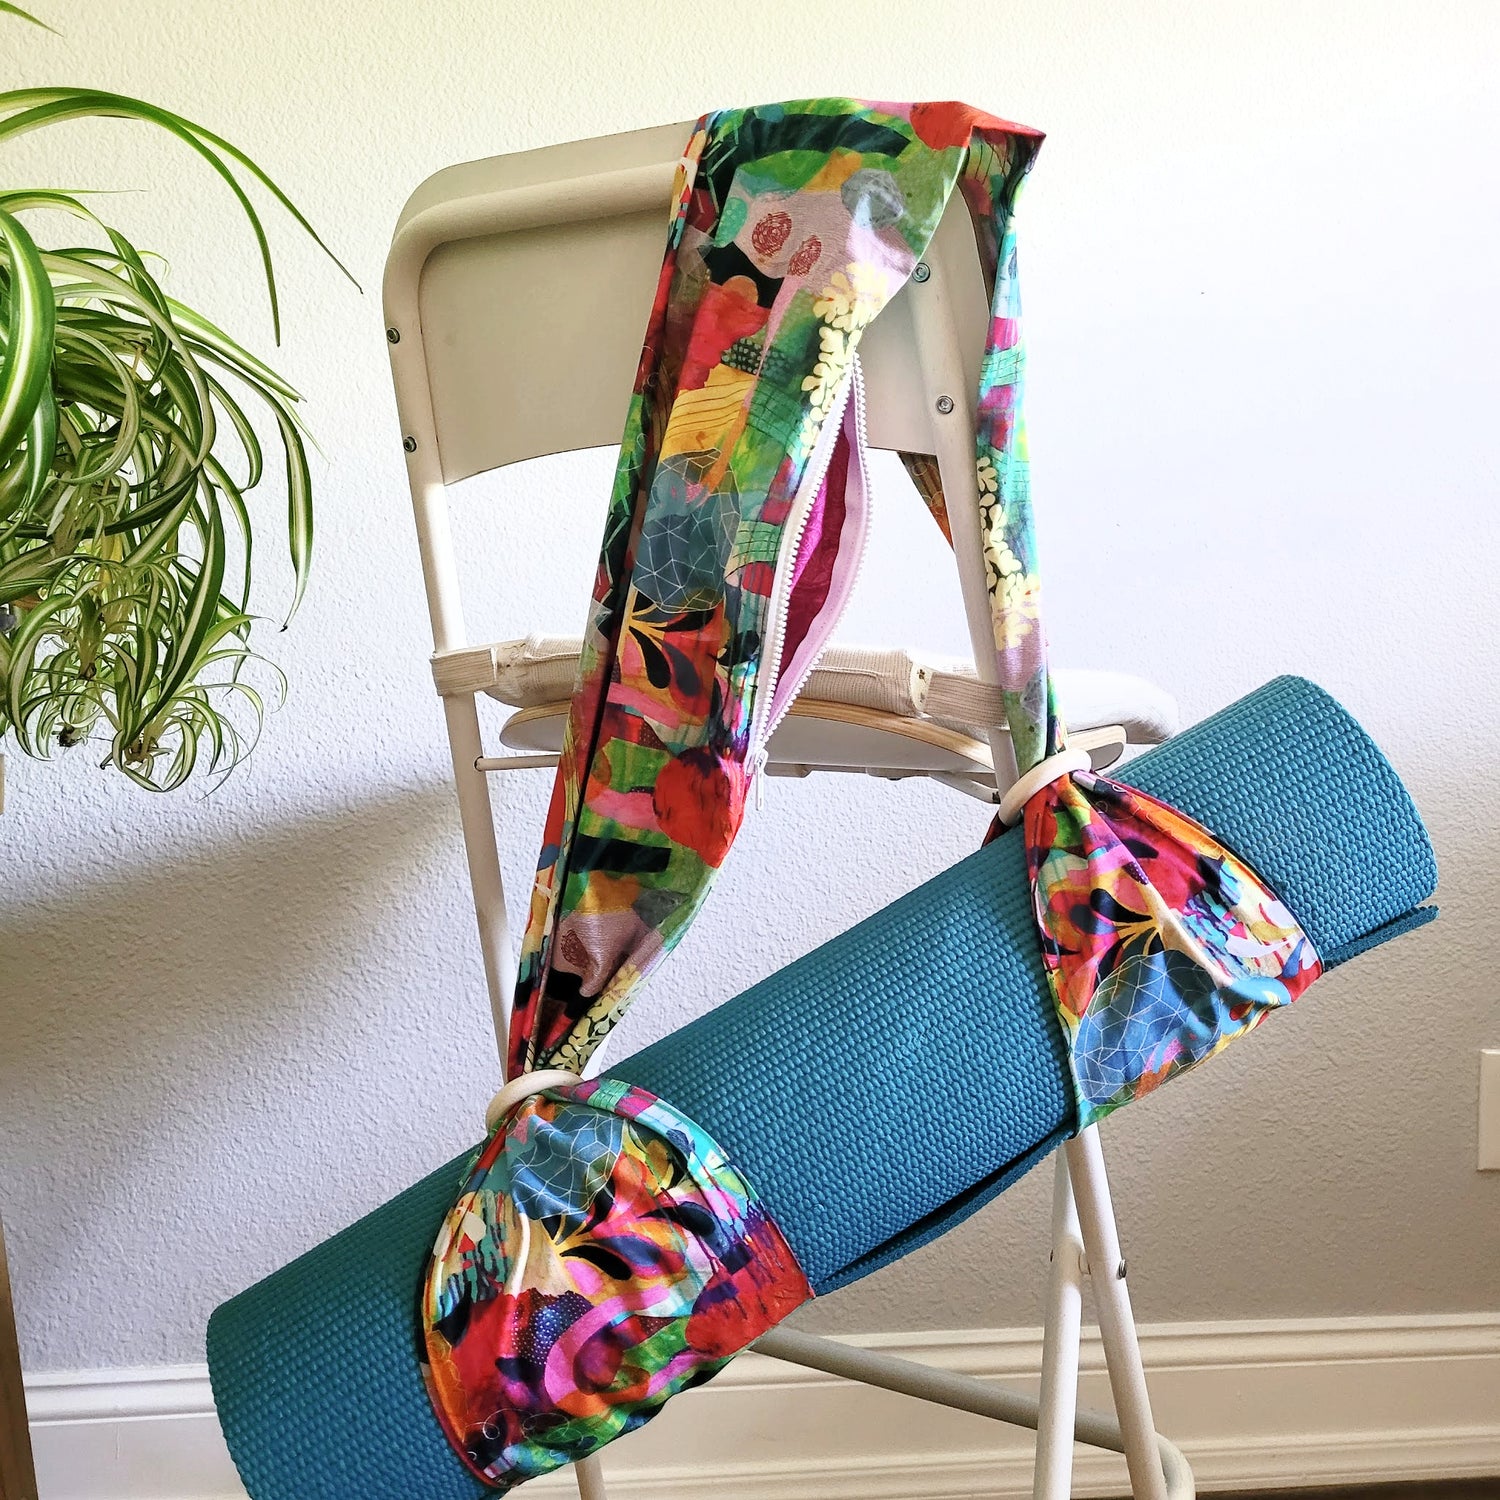 Yoga mat carrier strap Archives - Re.Bag.Re.Use